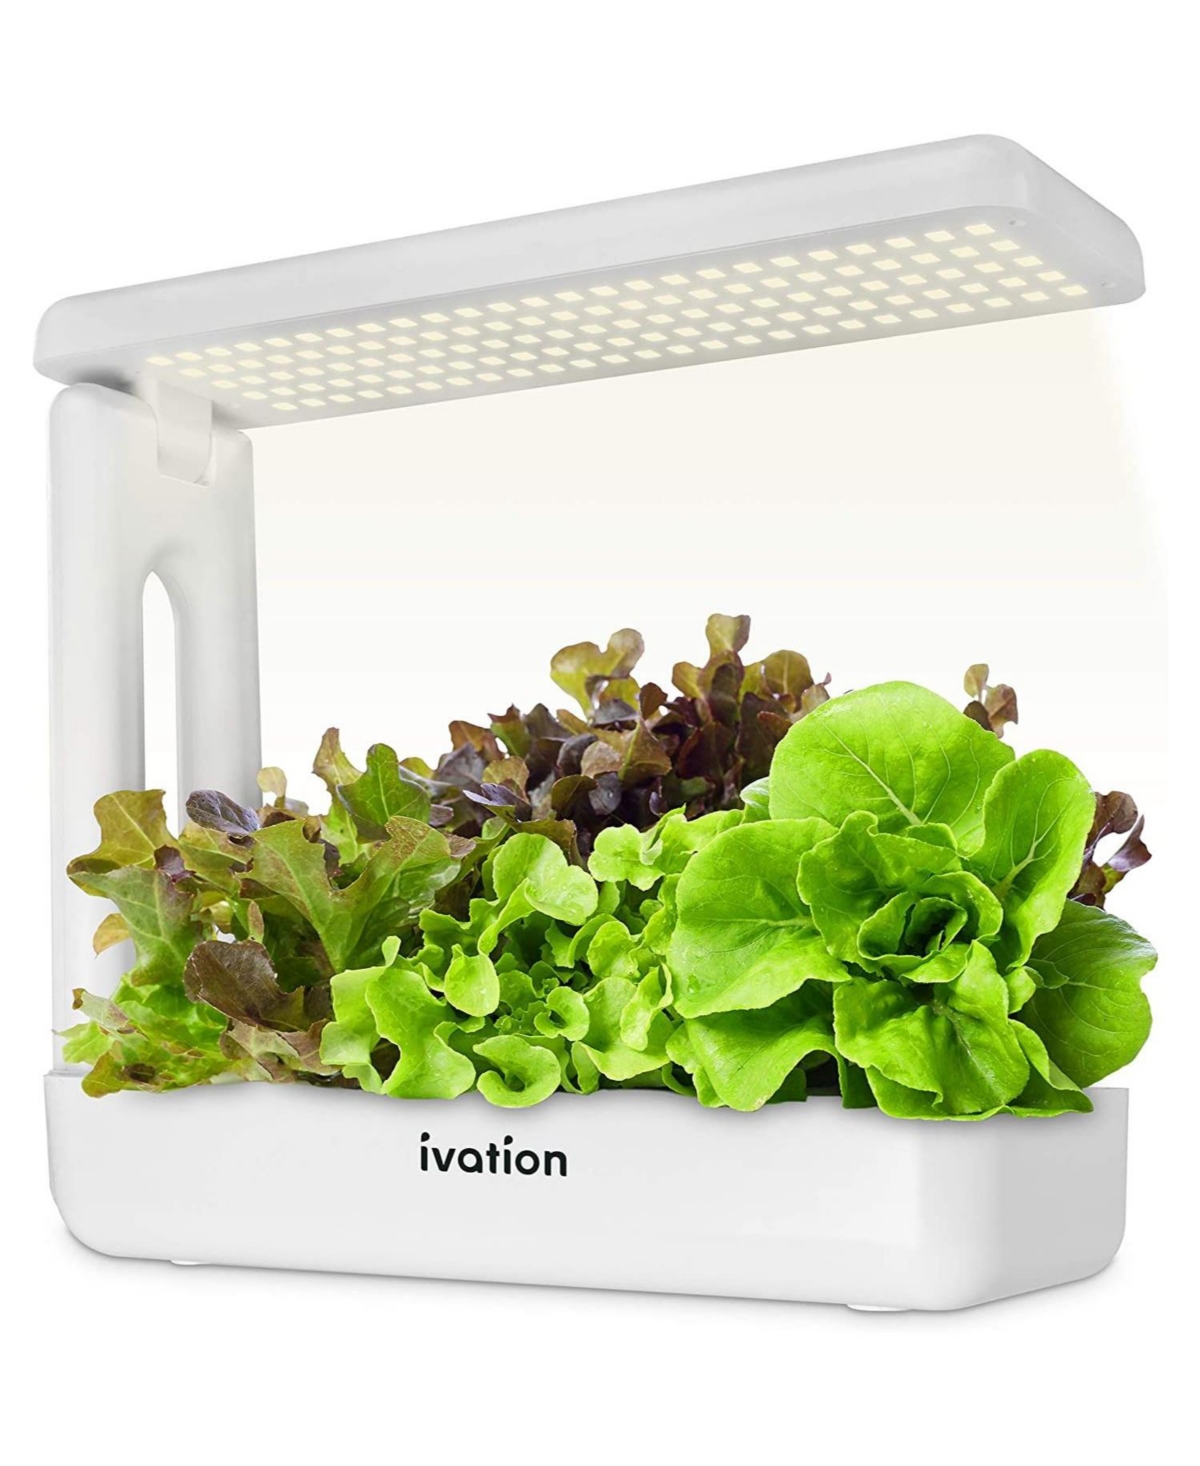 11-Pod Indoor Garden Kit, Complete Hydroponics Growing System - White